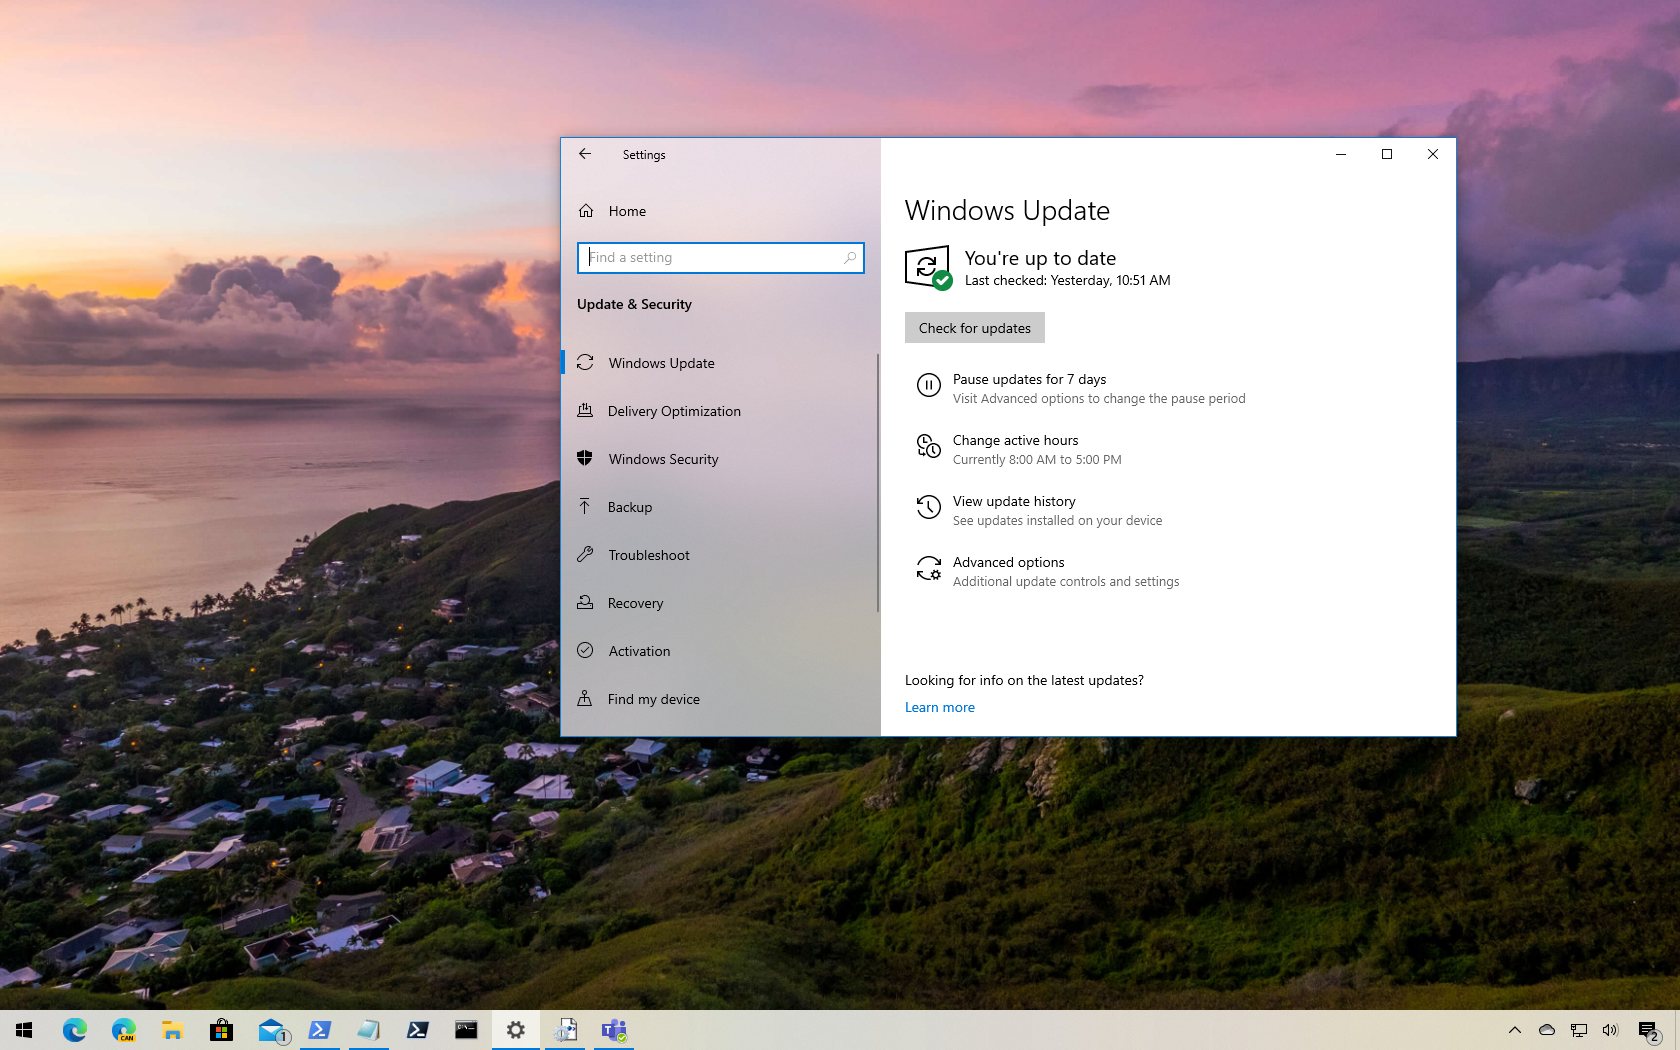 Open the Start menu and search for Windows Update Settings.
Select Advanced Options.